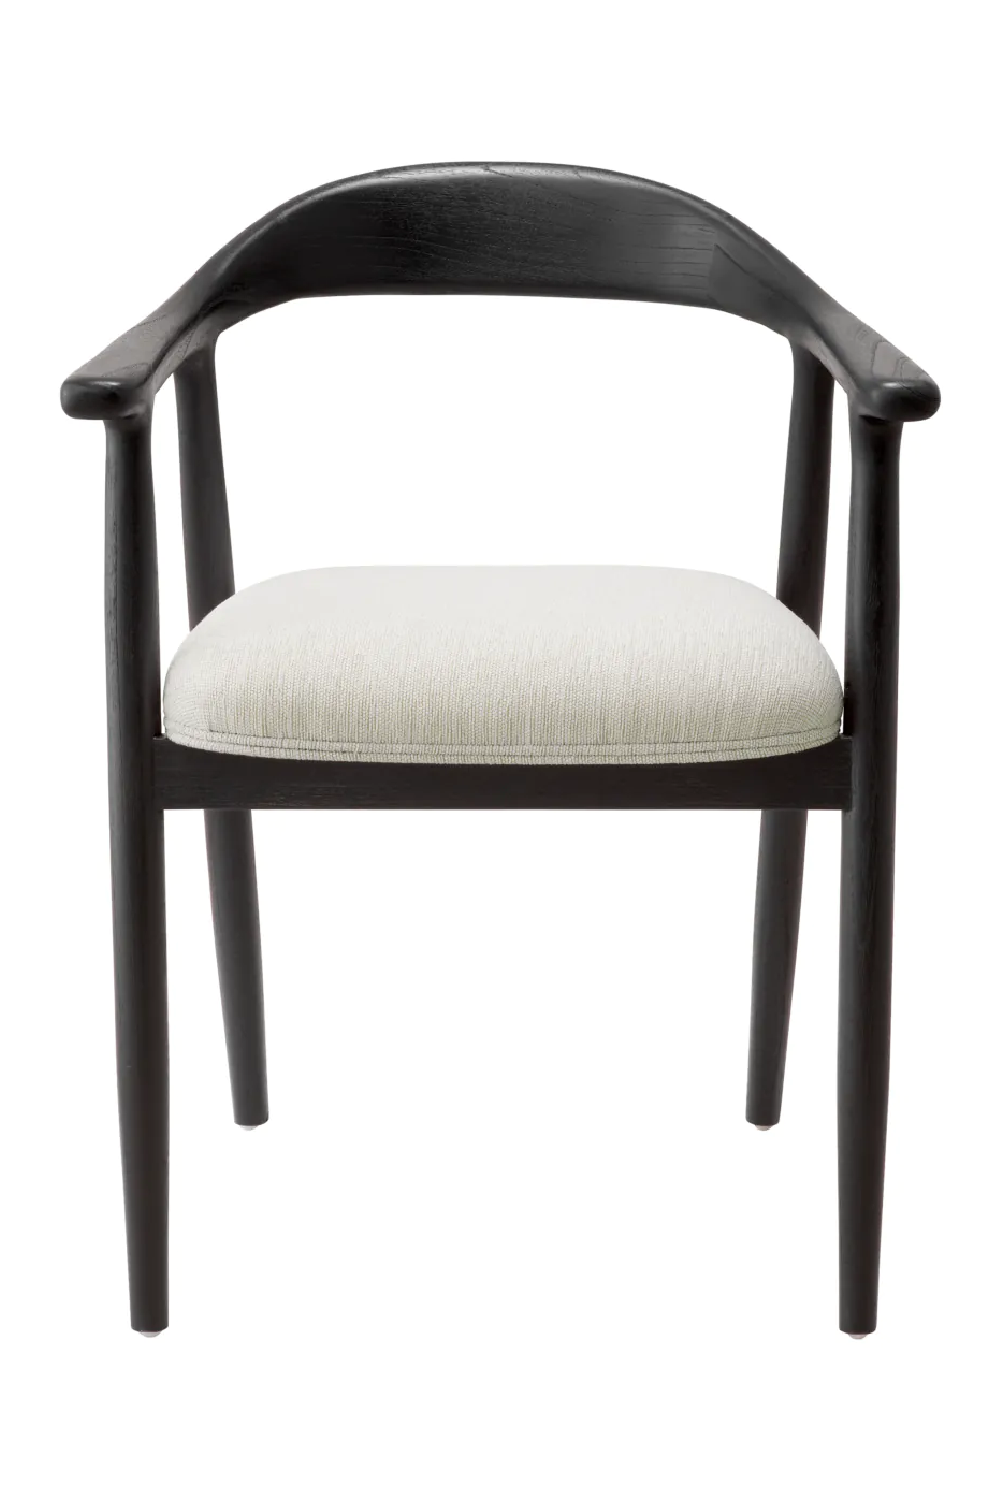 Black Curved Dining Chair | Eichholtz Beale | Oroa.com